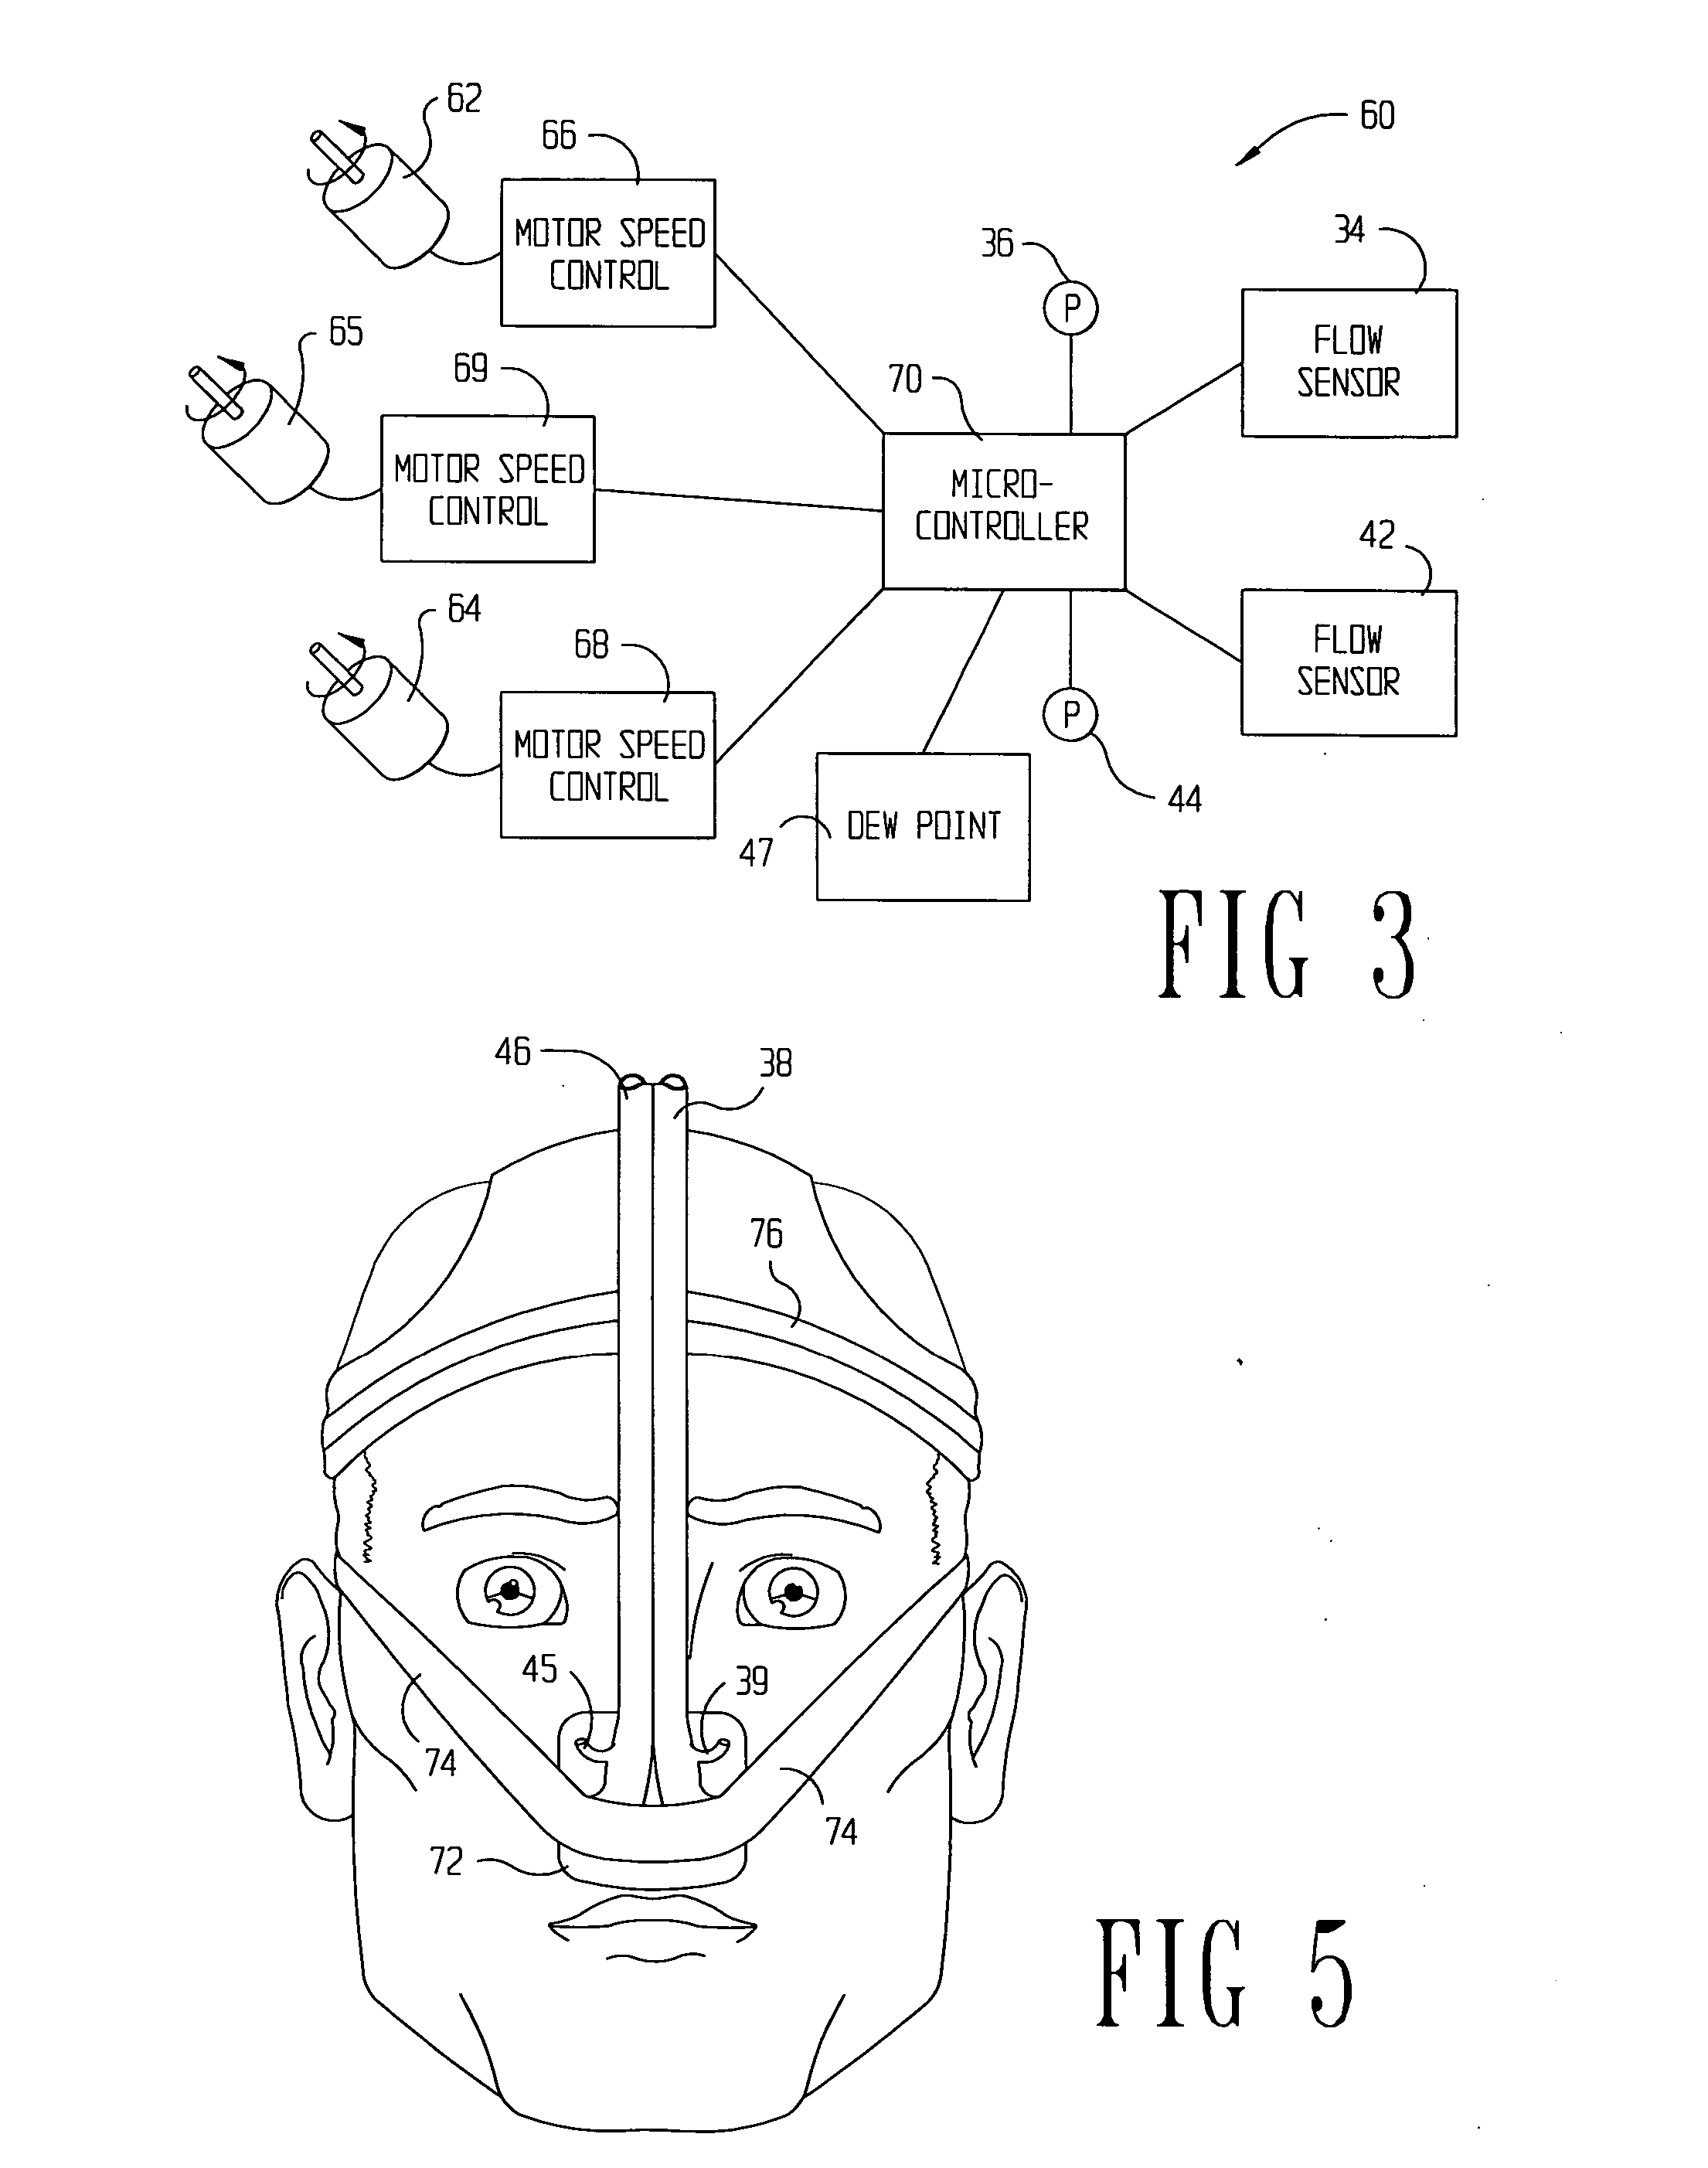 Method and system of Individually controlling airway pressure of a patient's nares